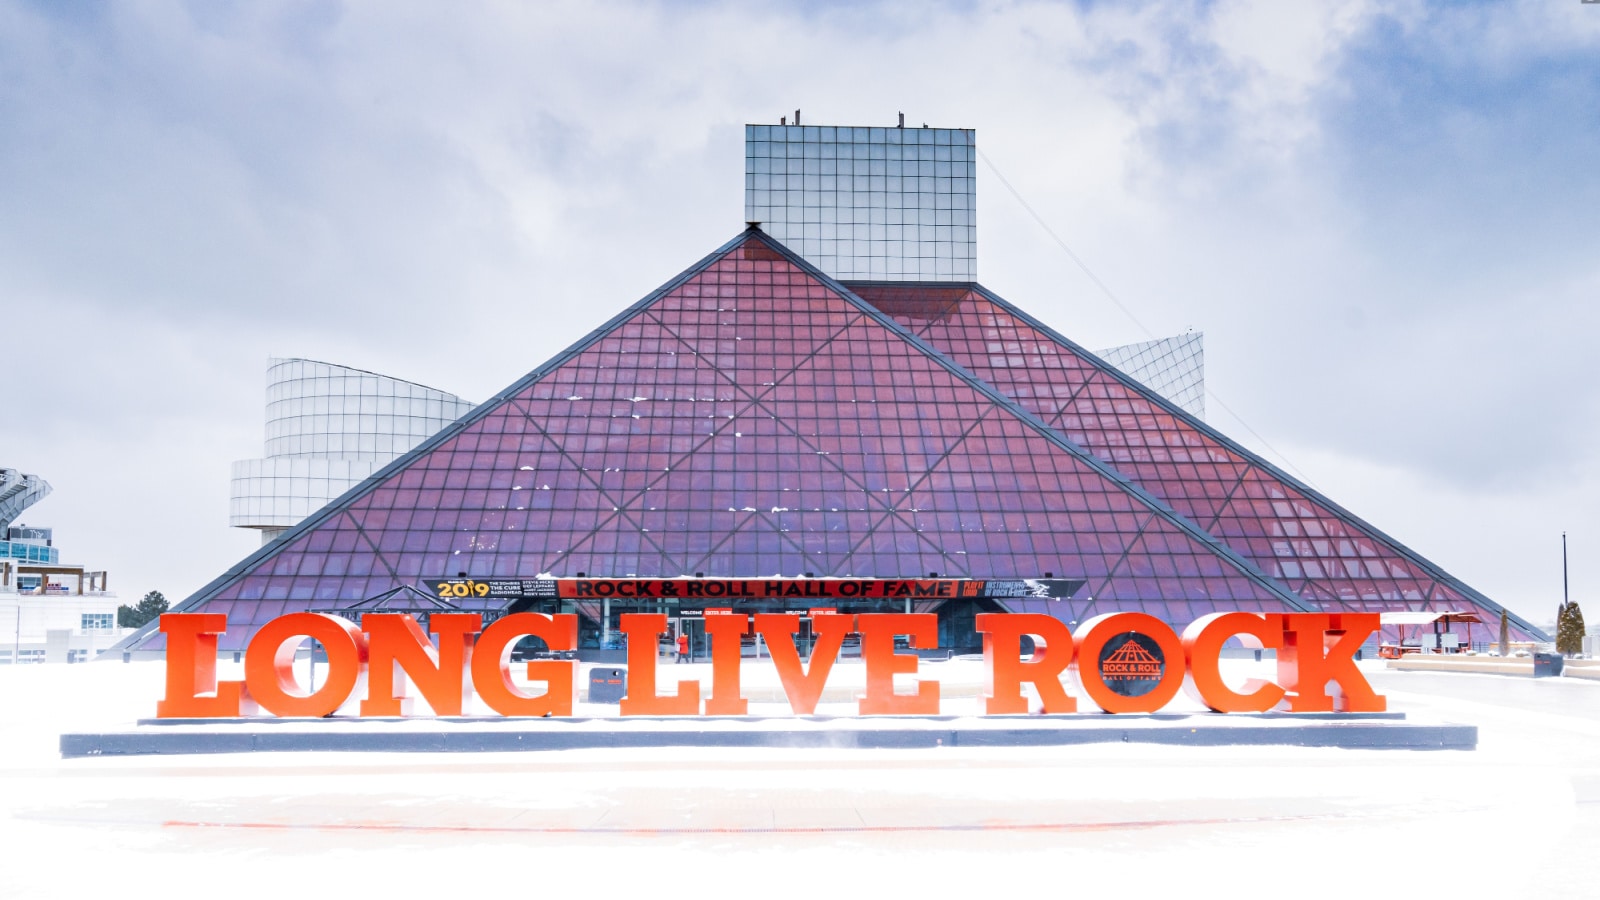 Cleveland, OH - Jan 7, 2020: Very Cold Weather but Rock and Roll Hall of Fame still beautiful and look interesting